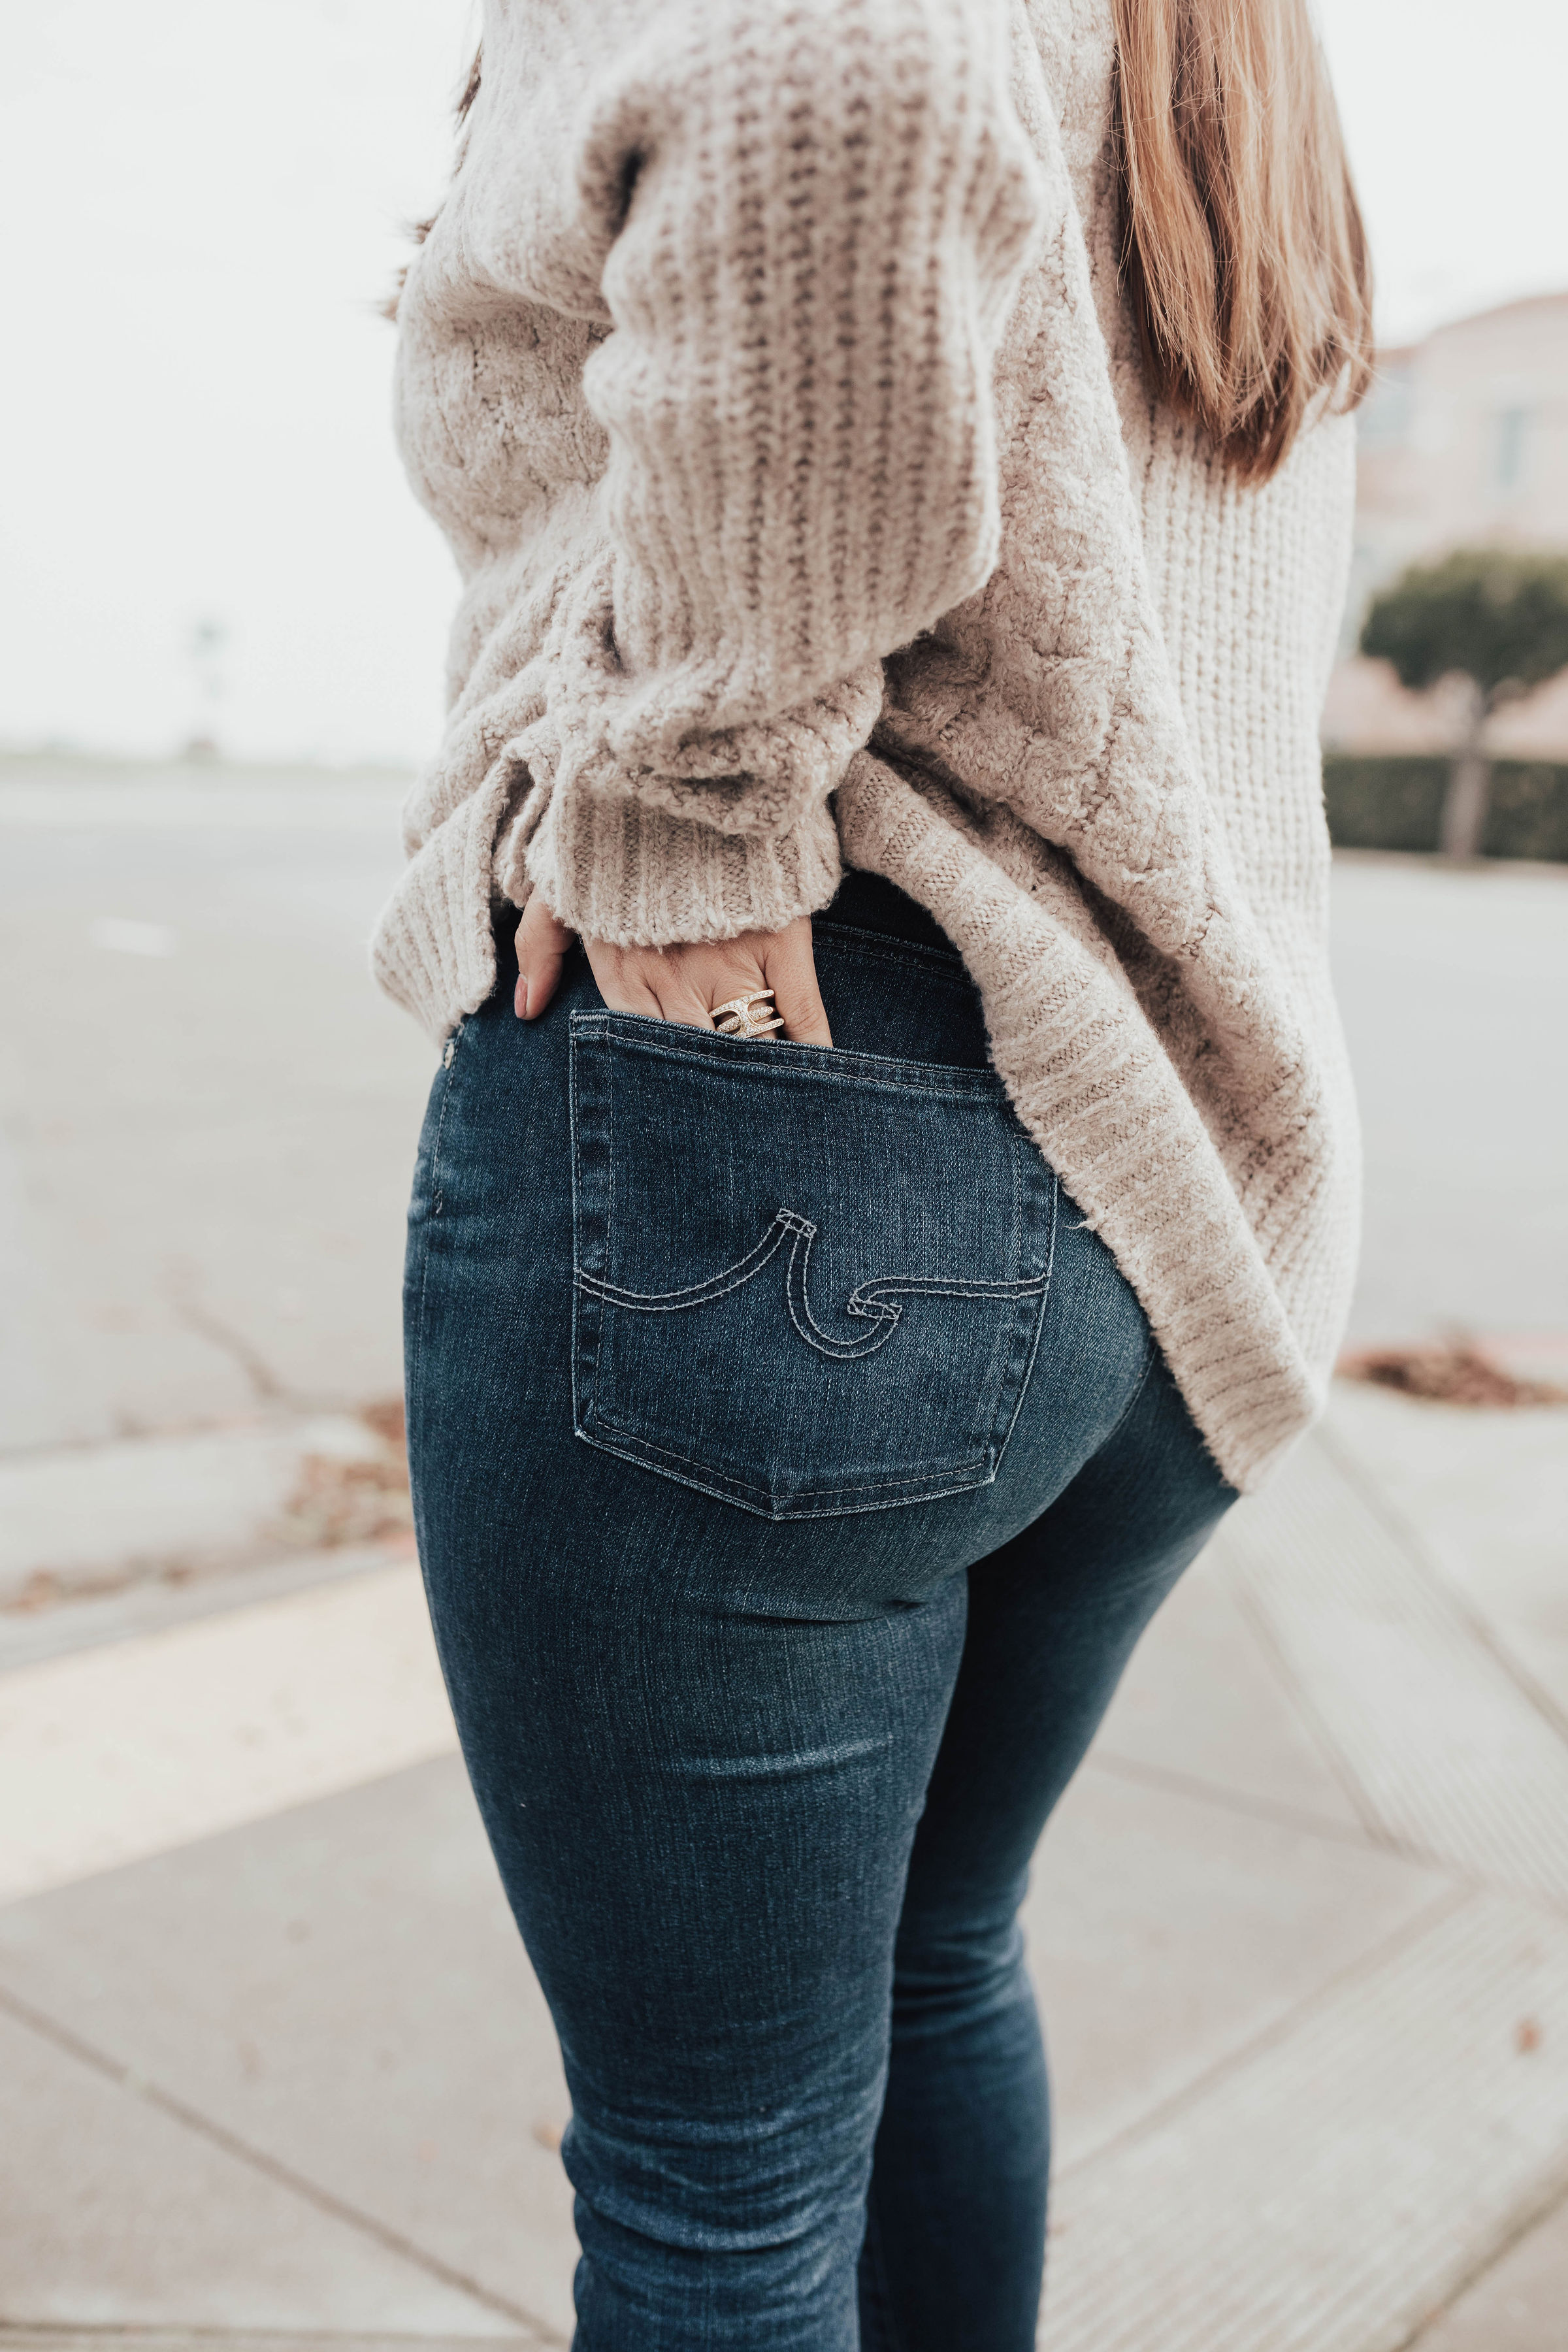 San Francisco blogger, Ashley Zeal, from Two Peas in a Prada shares her favorite jeans from the Evereve Denim Sale. All denim 15% off!